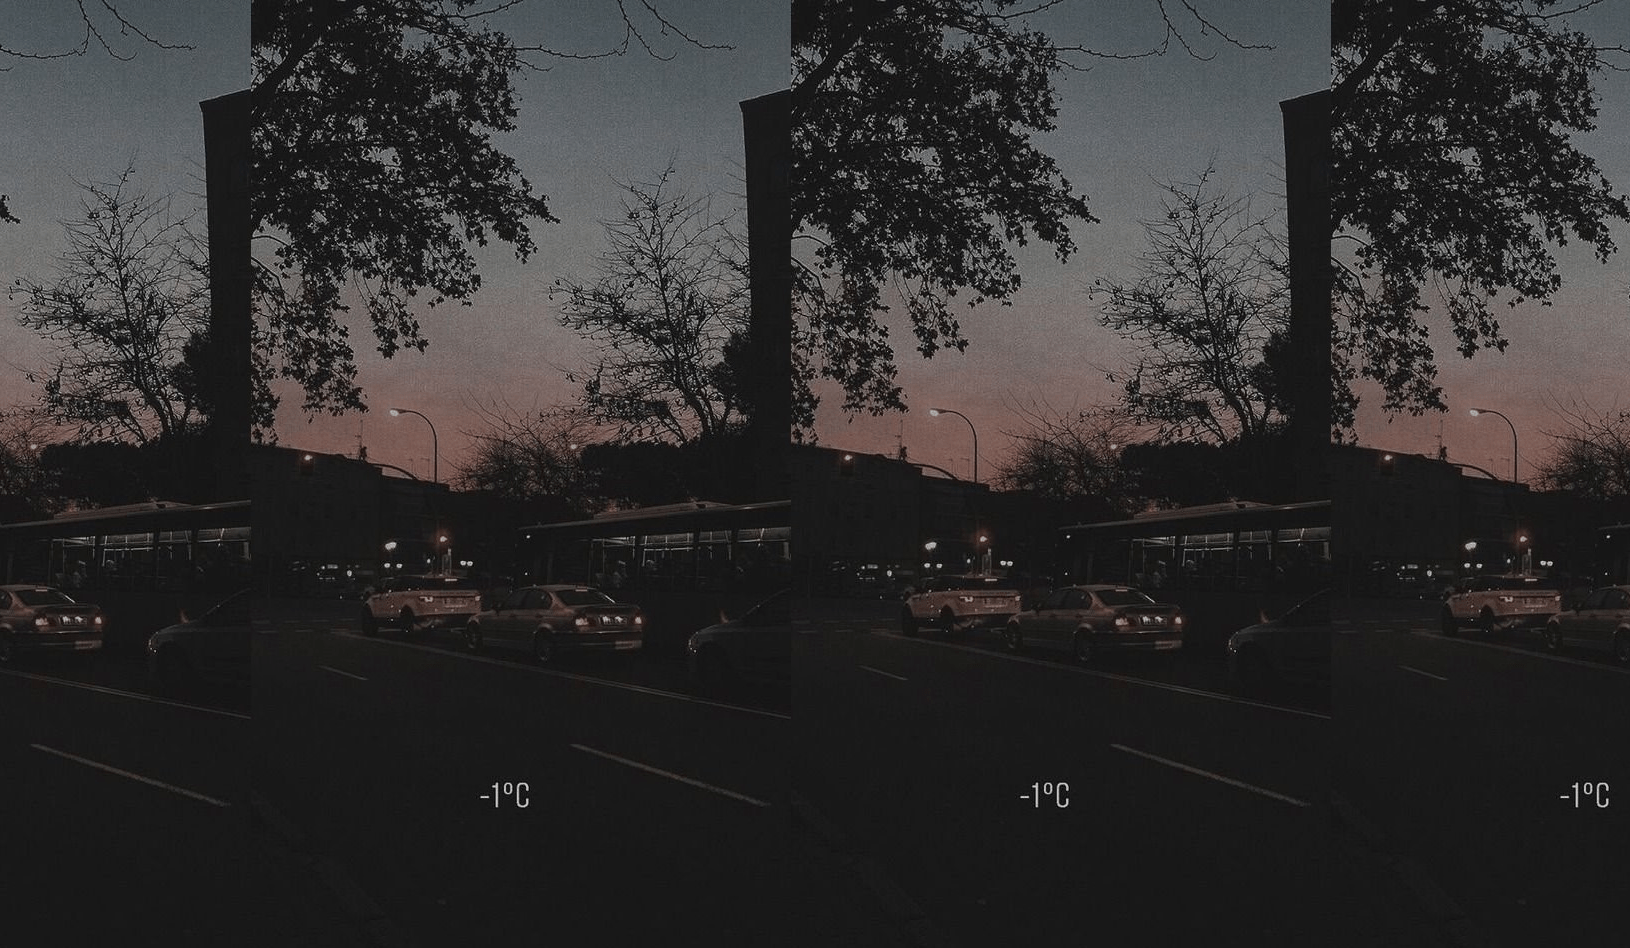 A city street at night with cars parked on the side of the road. - Dark